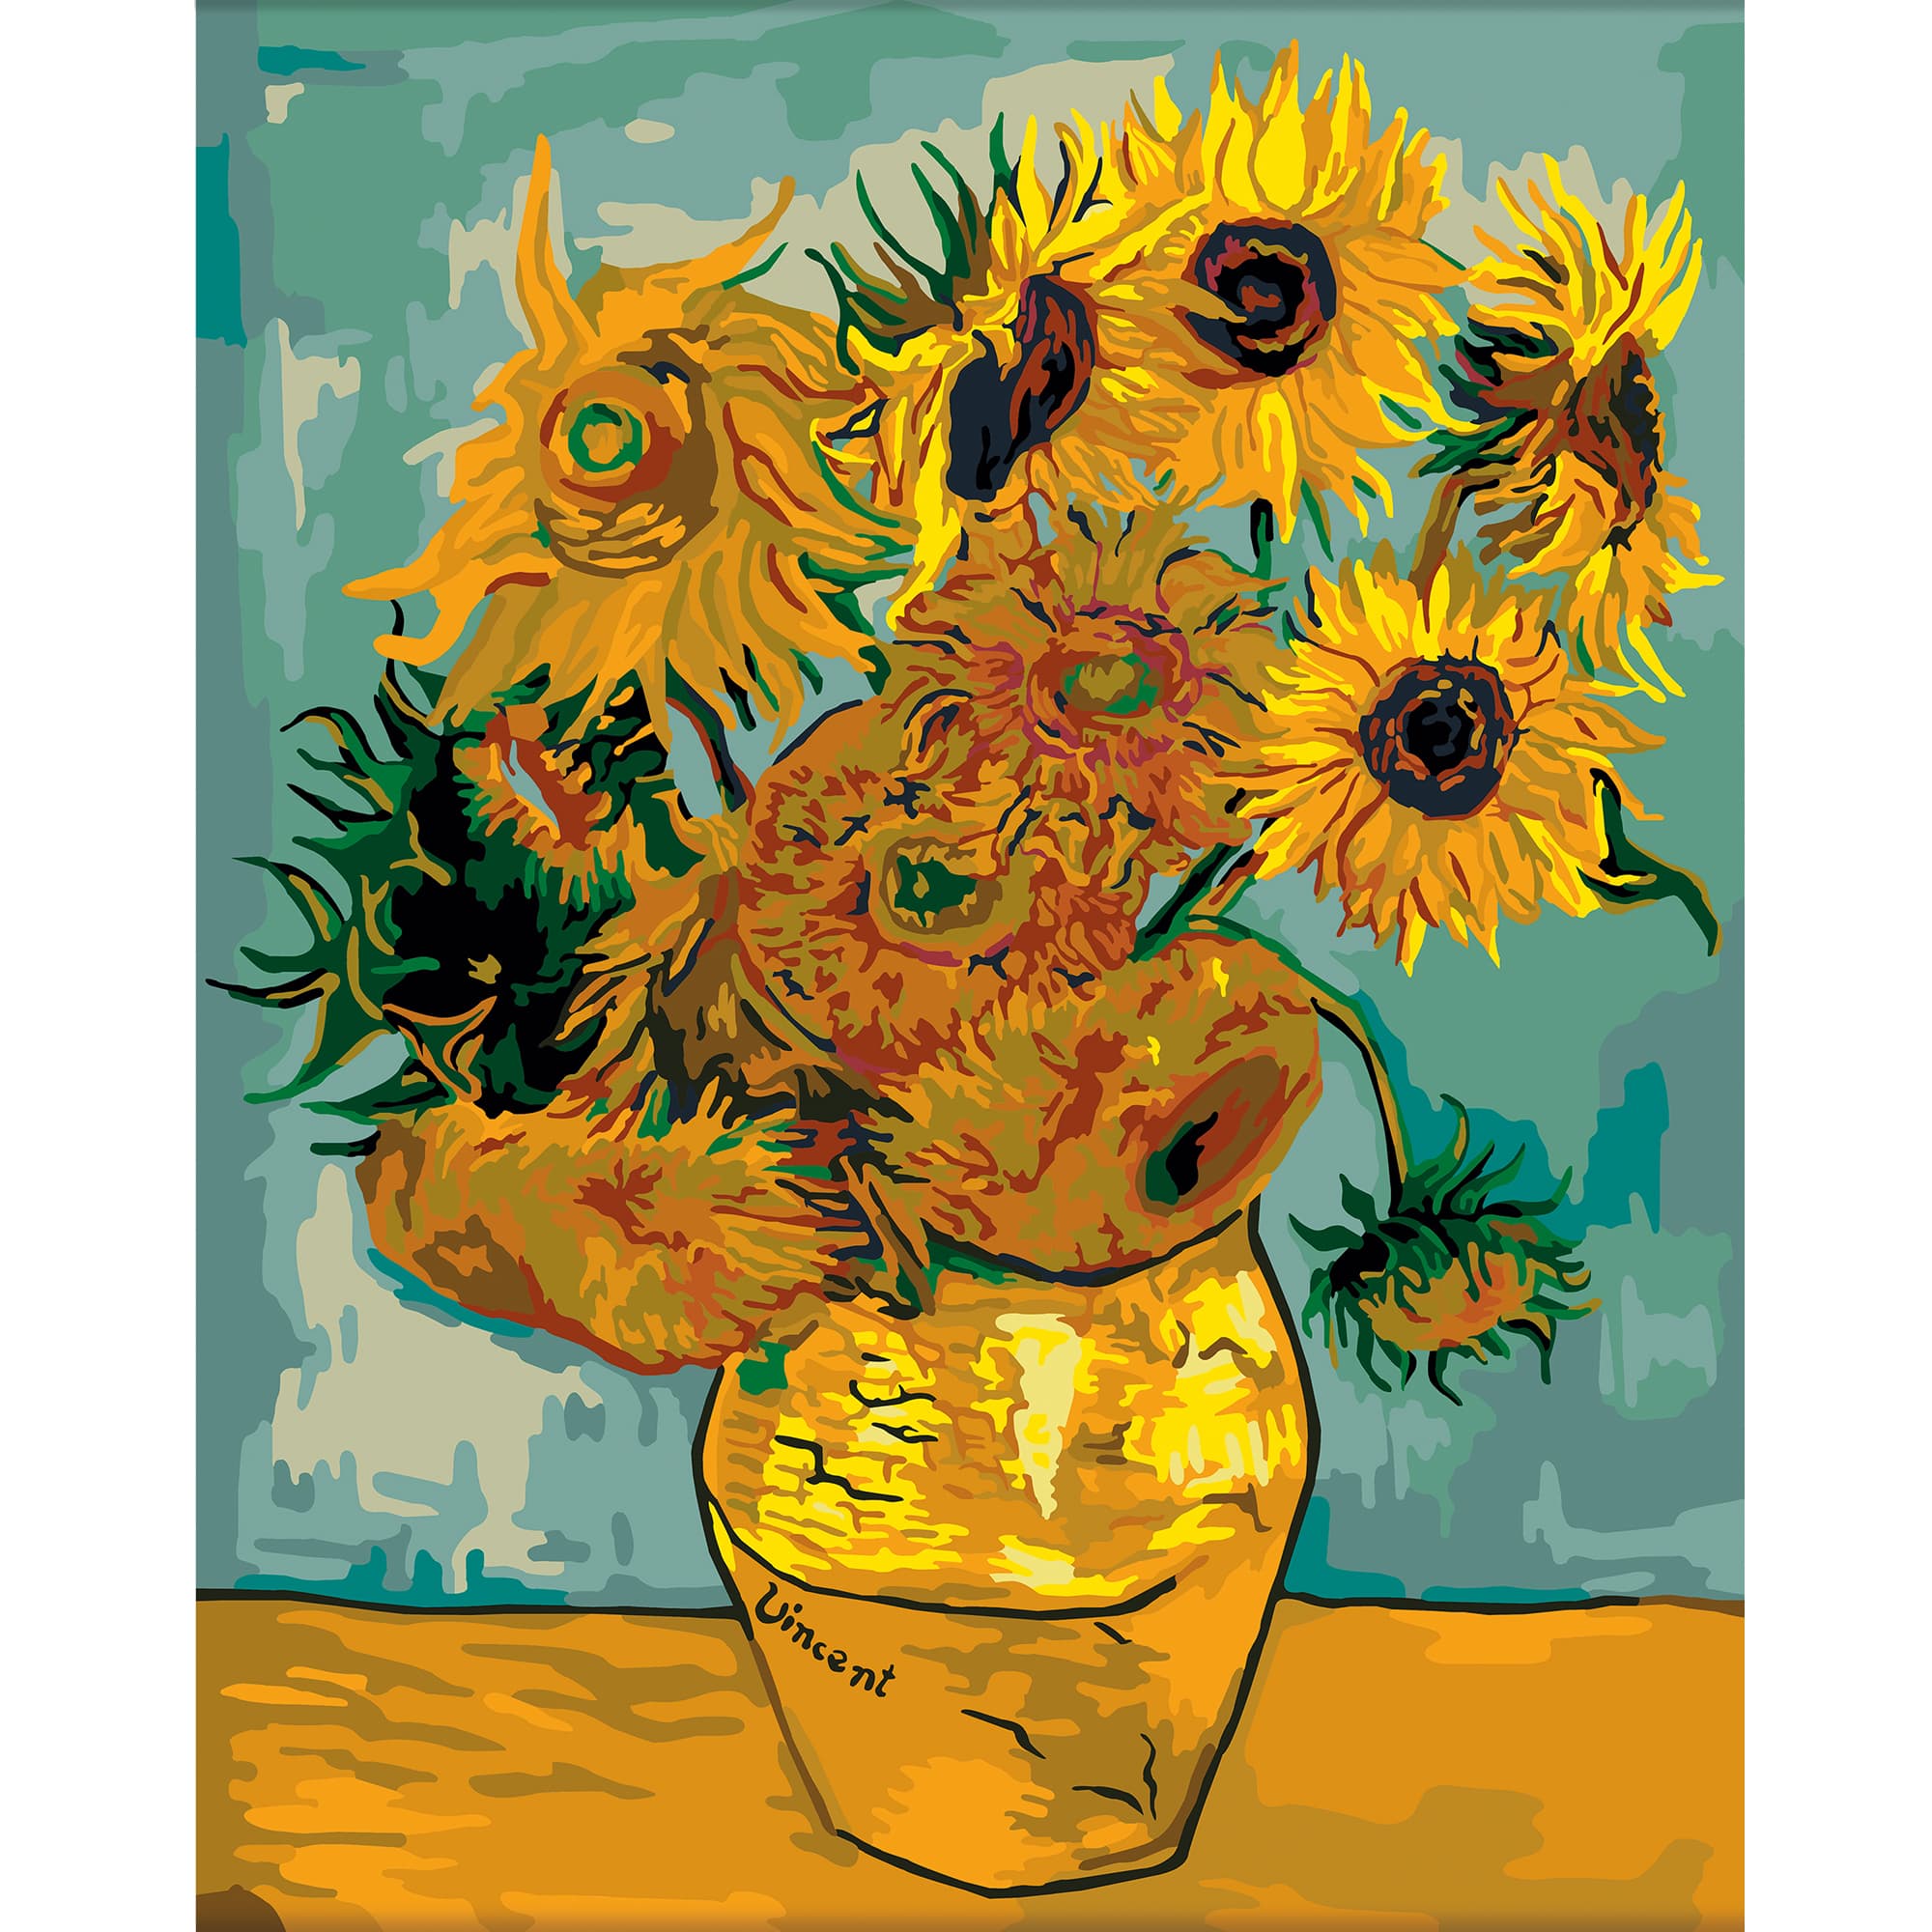 Van Gogh Starry Night Paint-by-Number Kit by Artist's Loft™ Necessities™